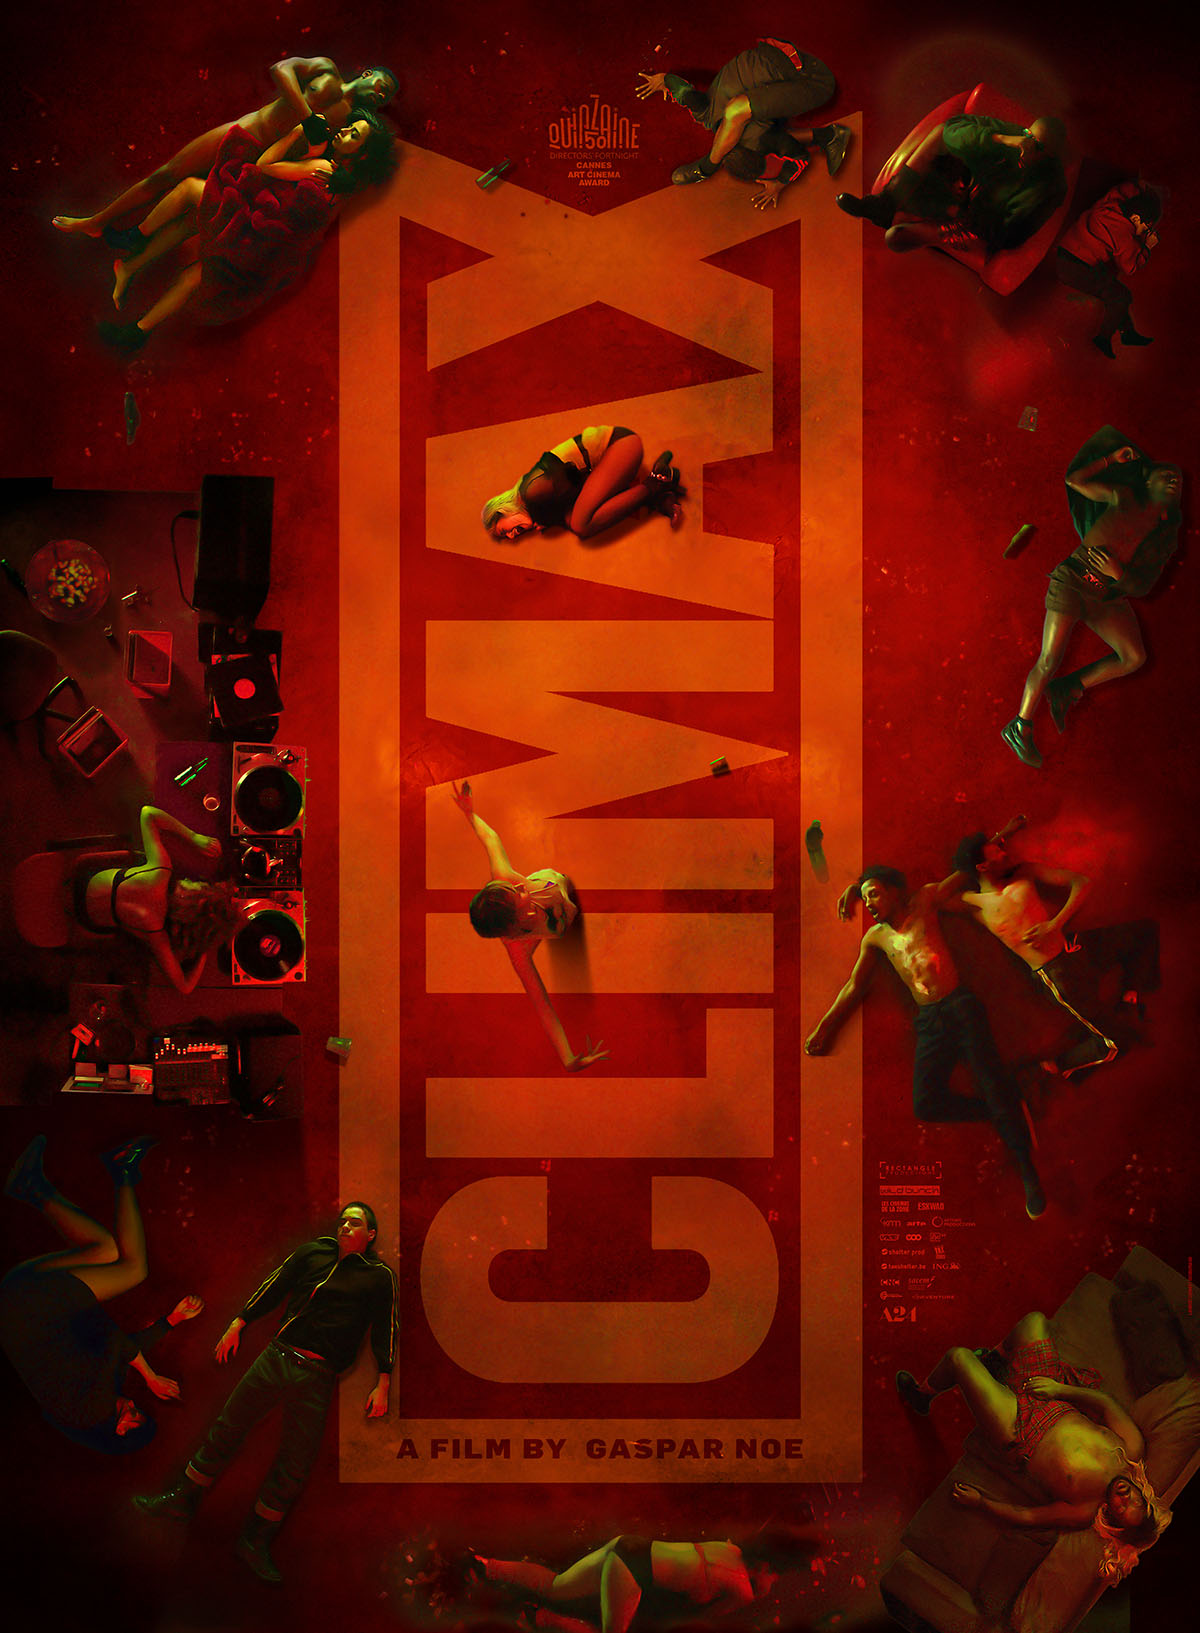 REVIEW: Climax (directed by Gasper Noé)